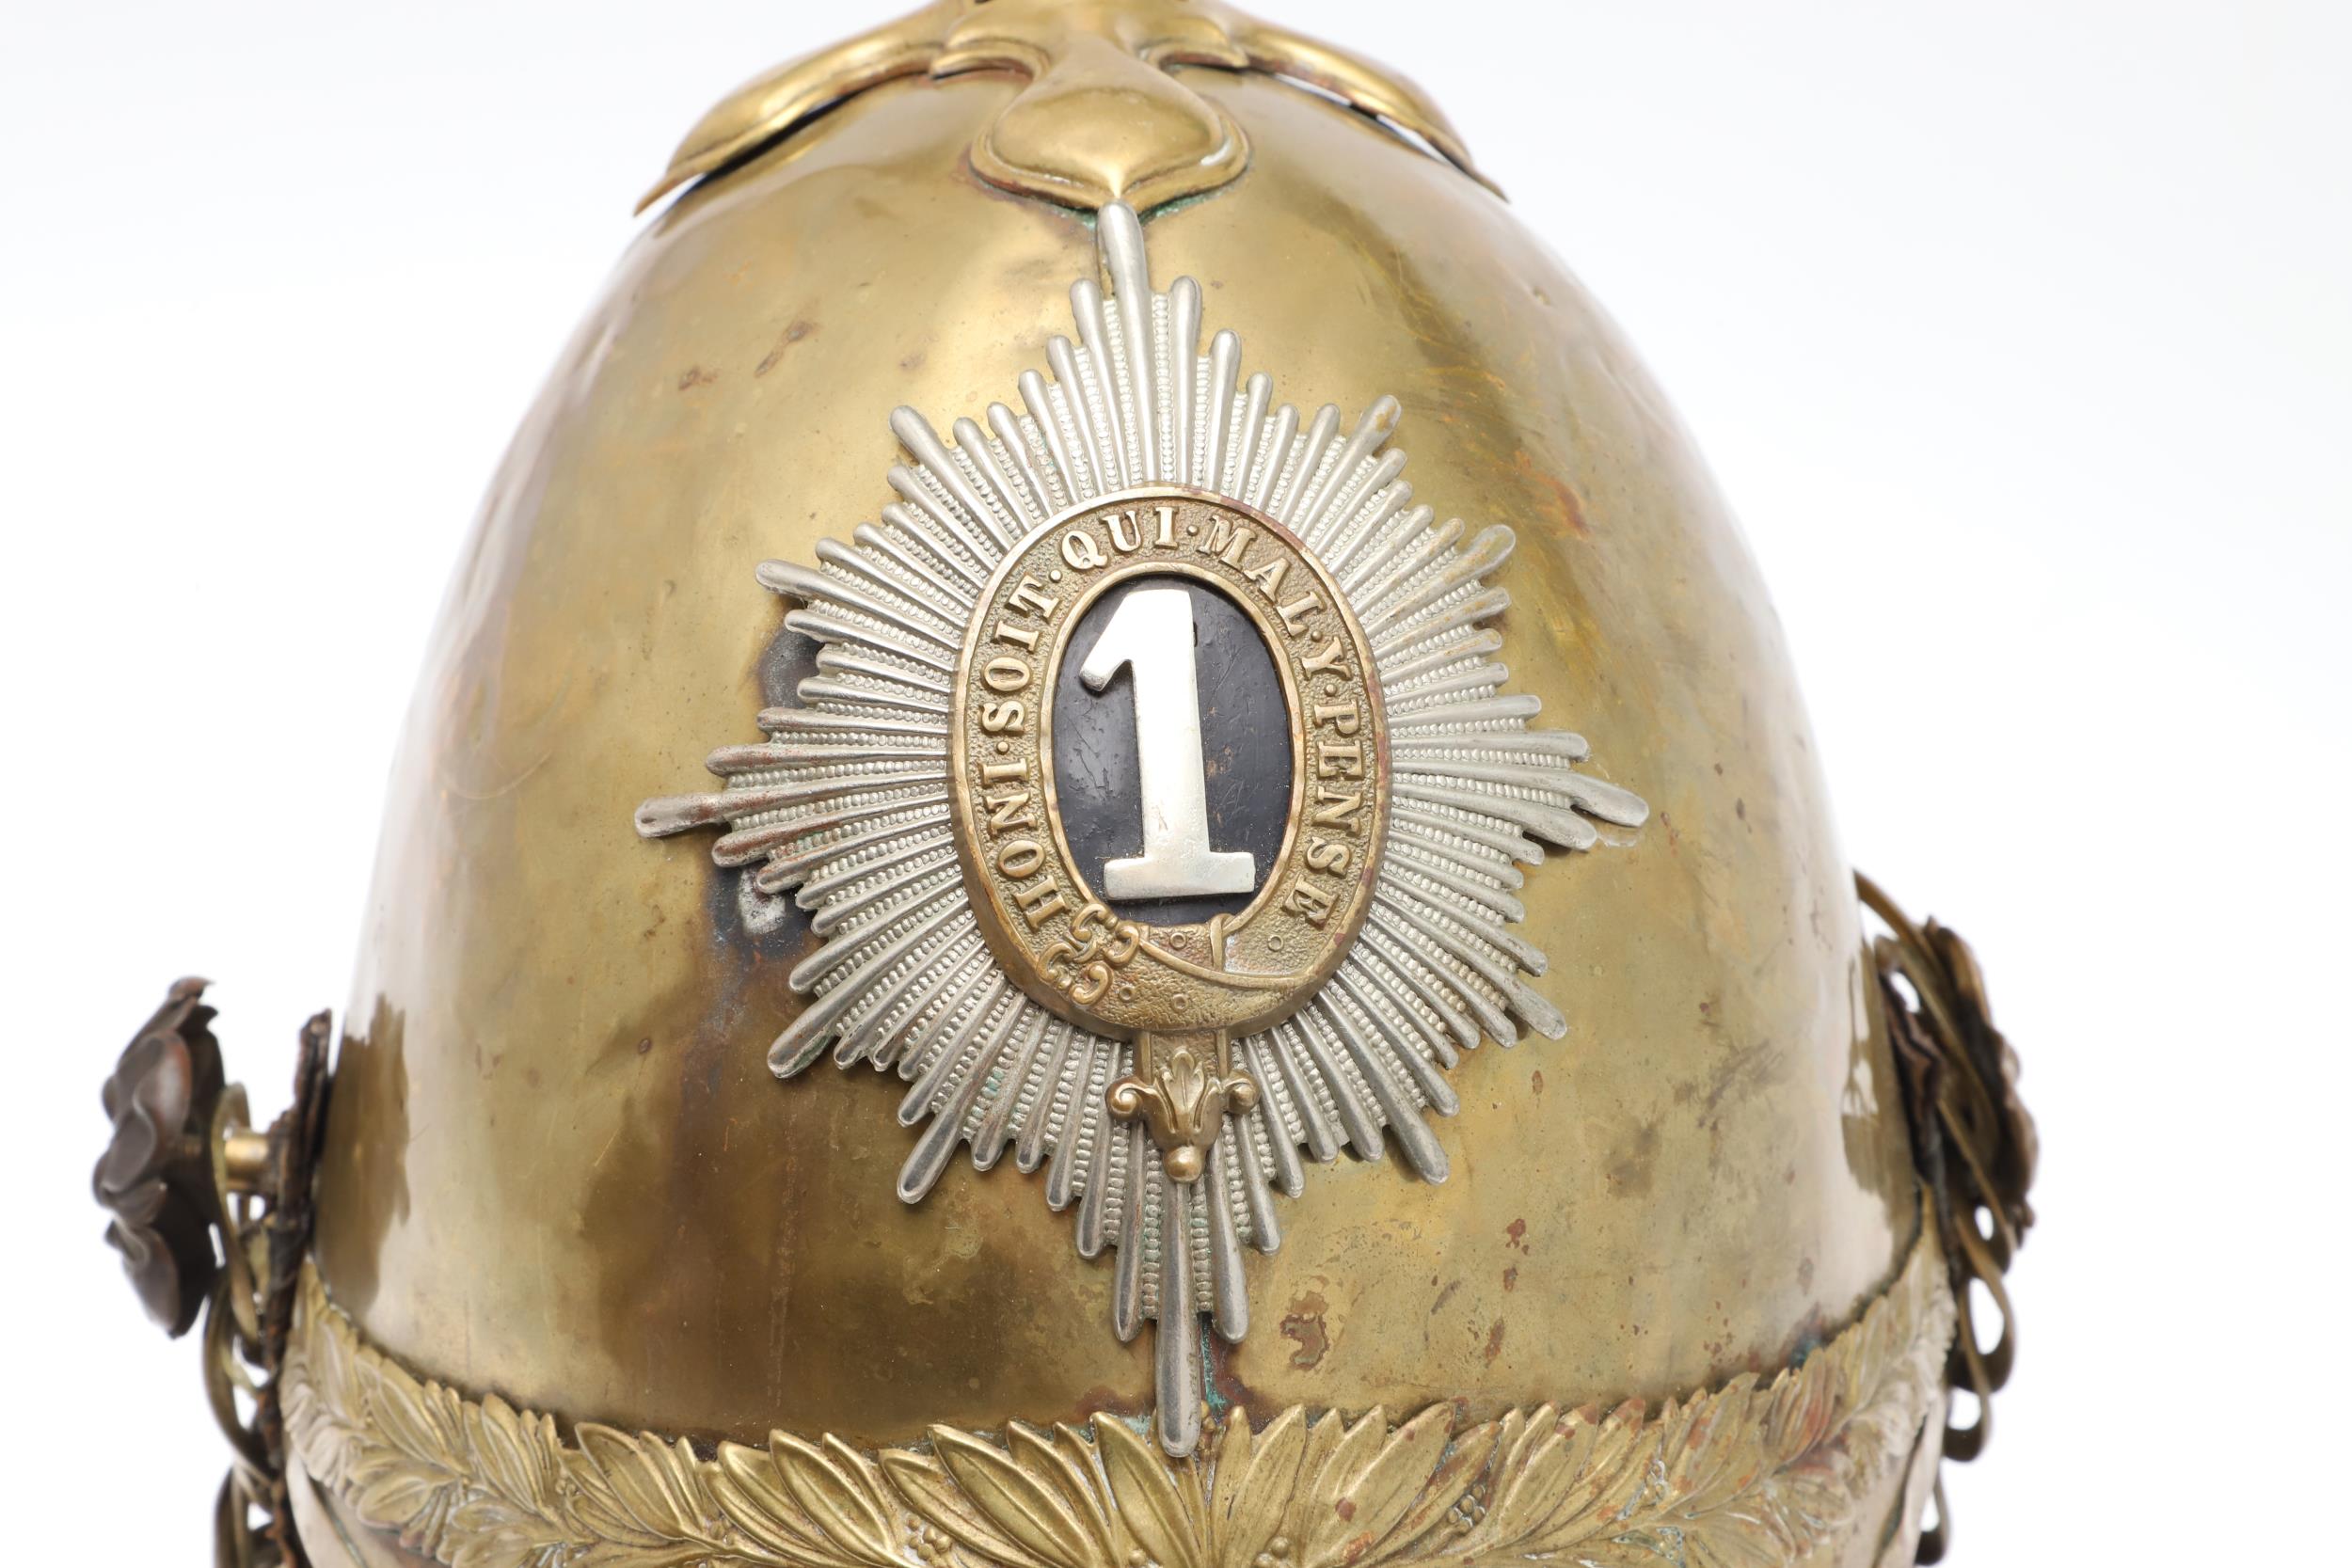 A 1ST DRAGOON GUARDS 1871 PATTERN HELMET. - Image 3 of 15